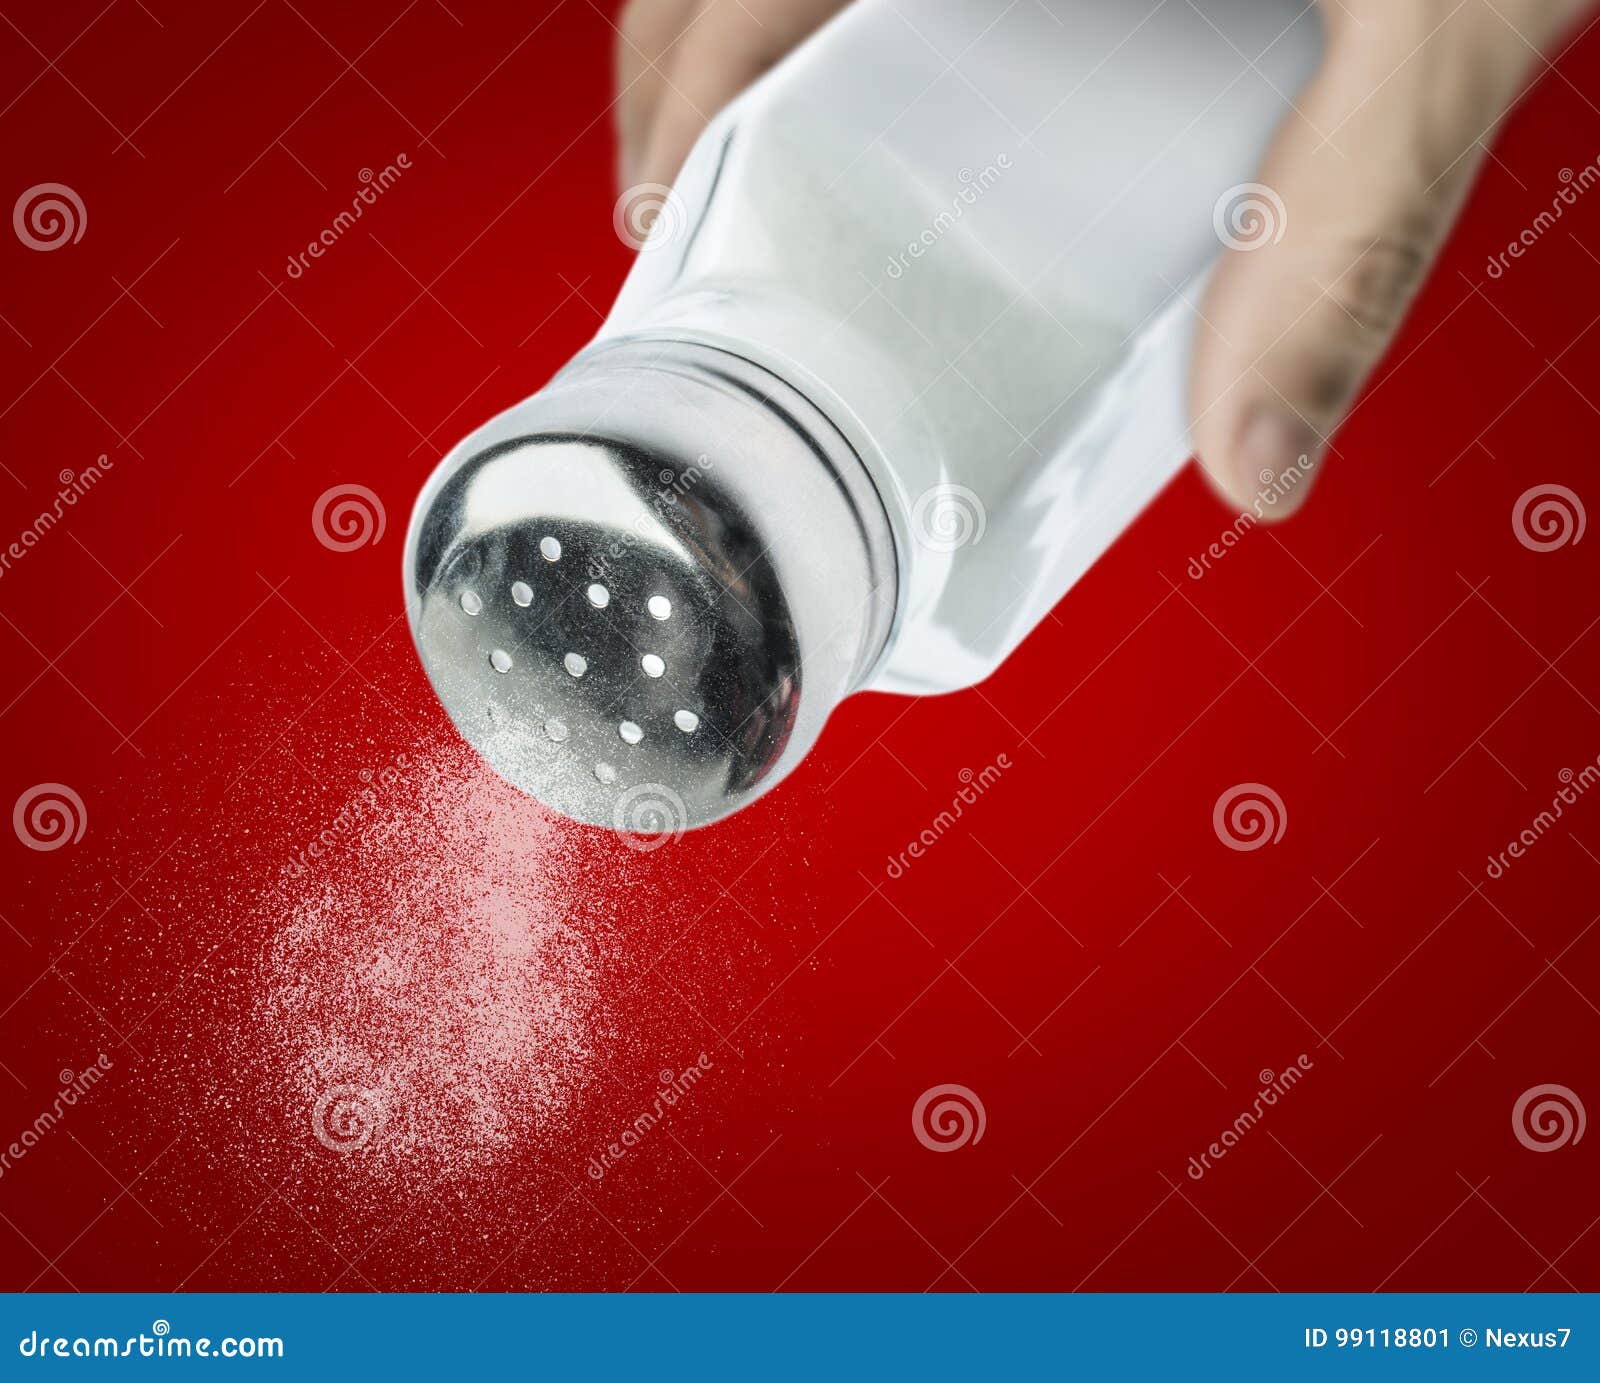 male hand pouring salt from a salt shaker